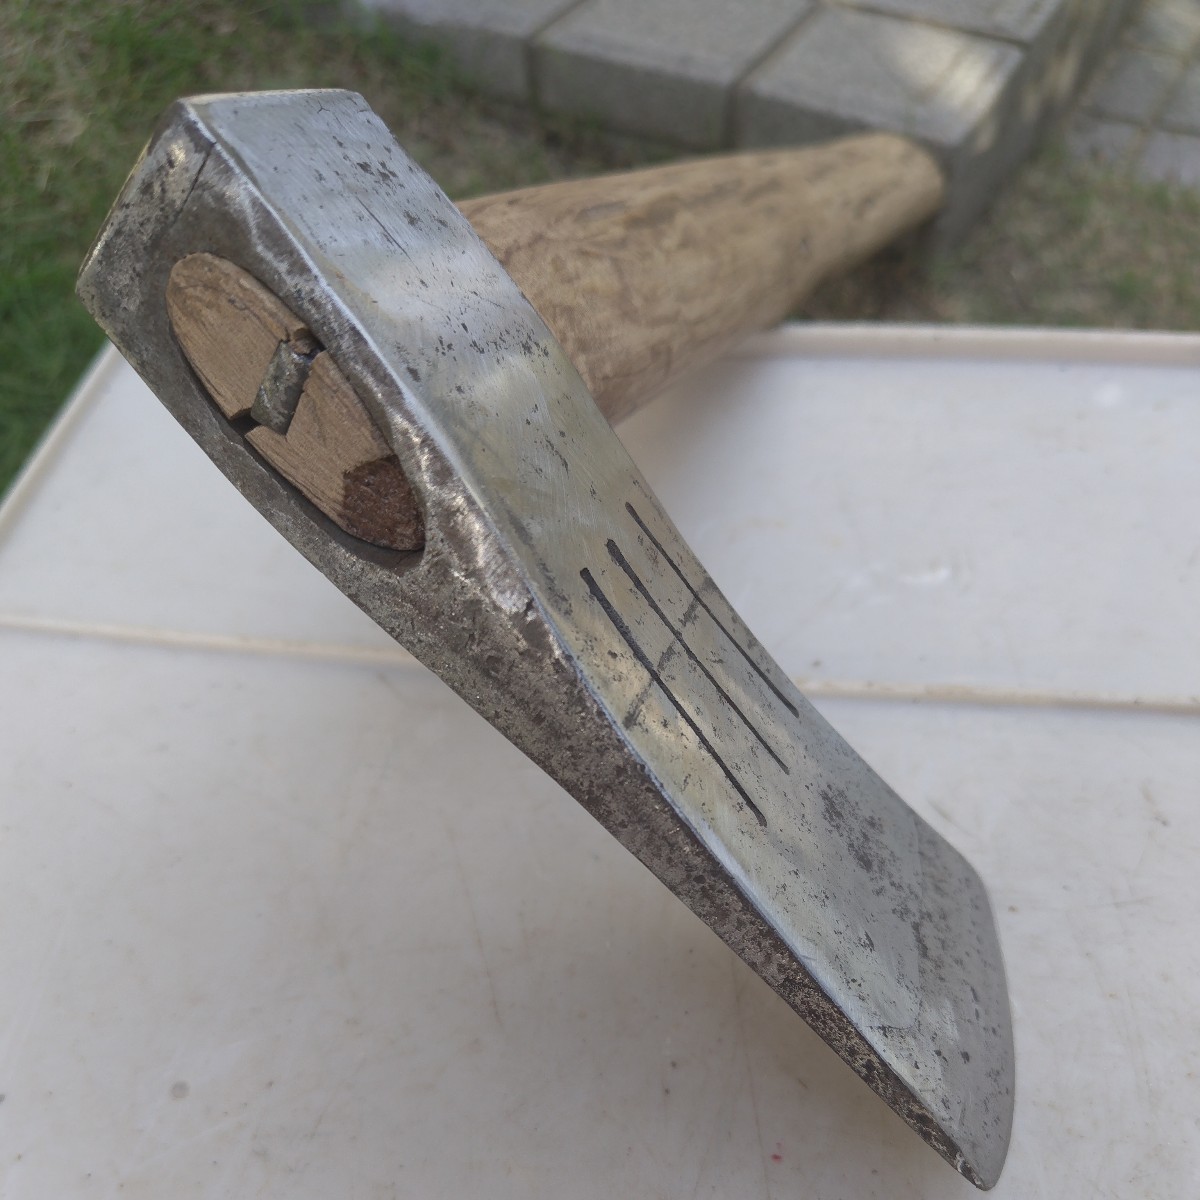  axe firewood tenth for mountain work for ( used )